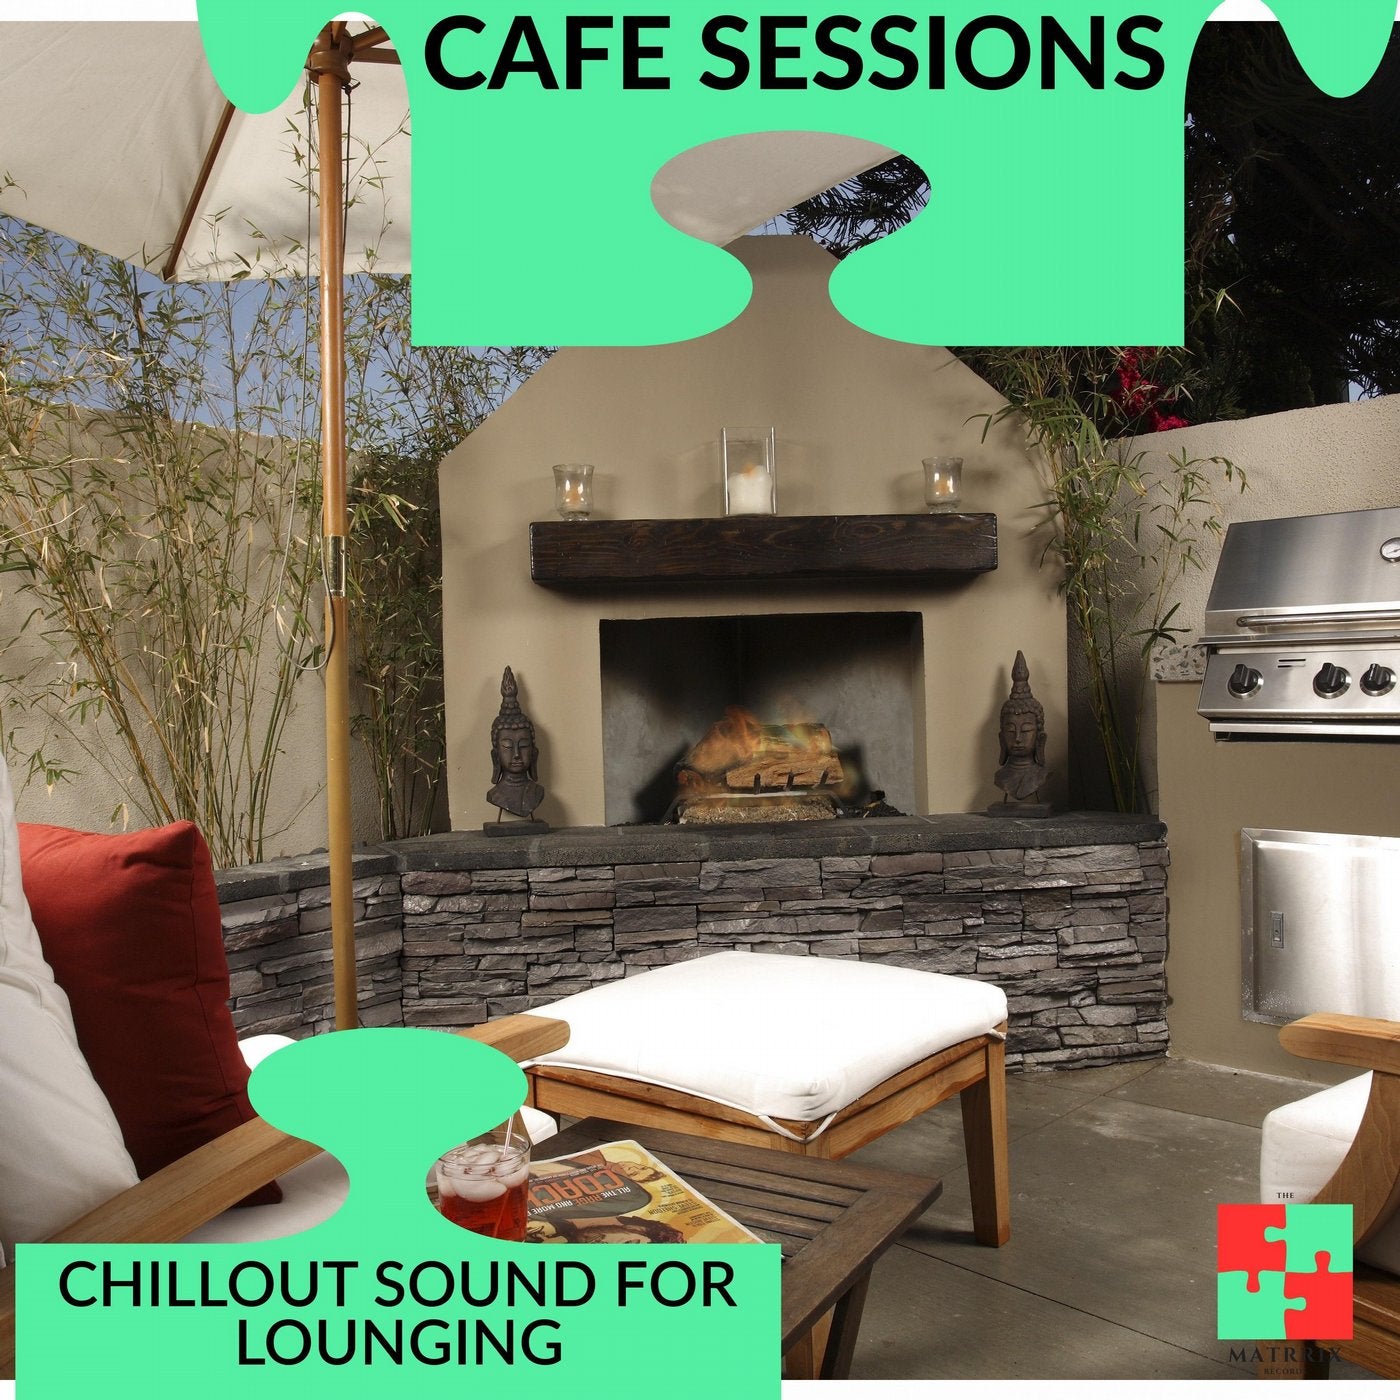 Cafe Sessions - Chillout Sound For Lounging